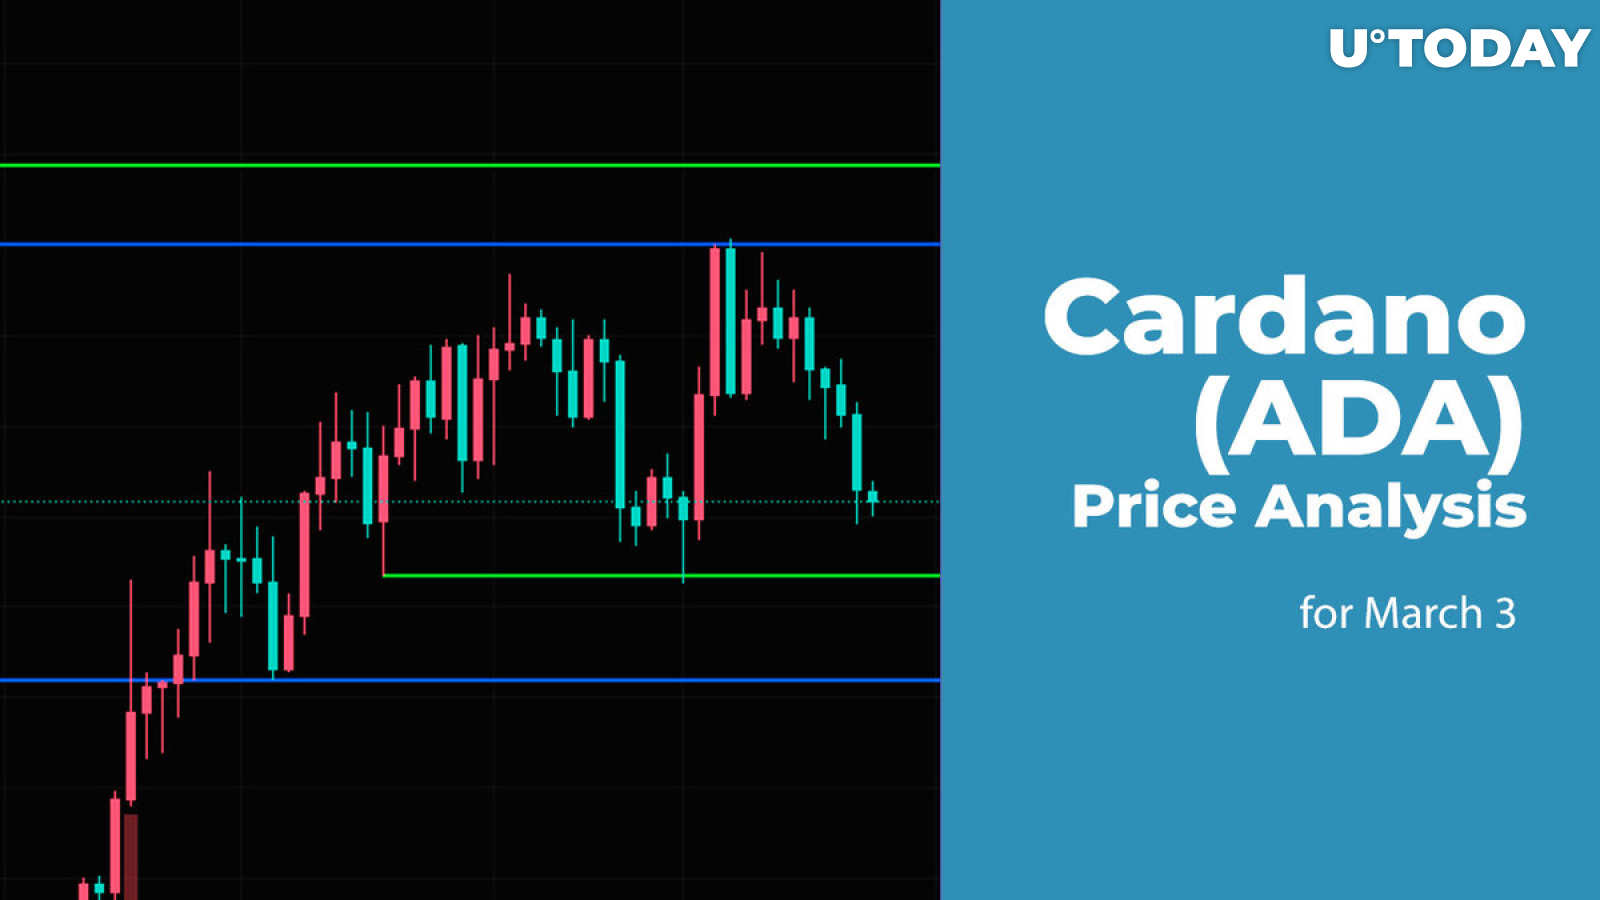 Cardano (ADA) Price Analysis for March 3